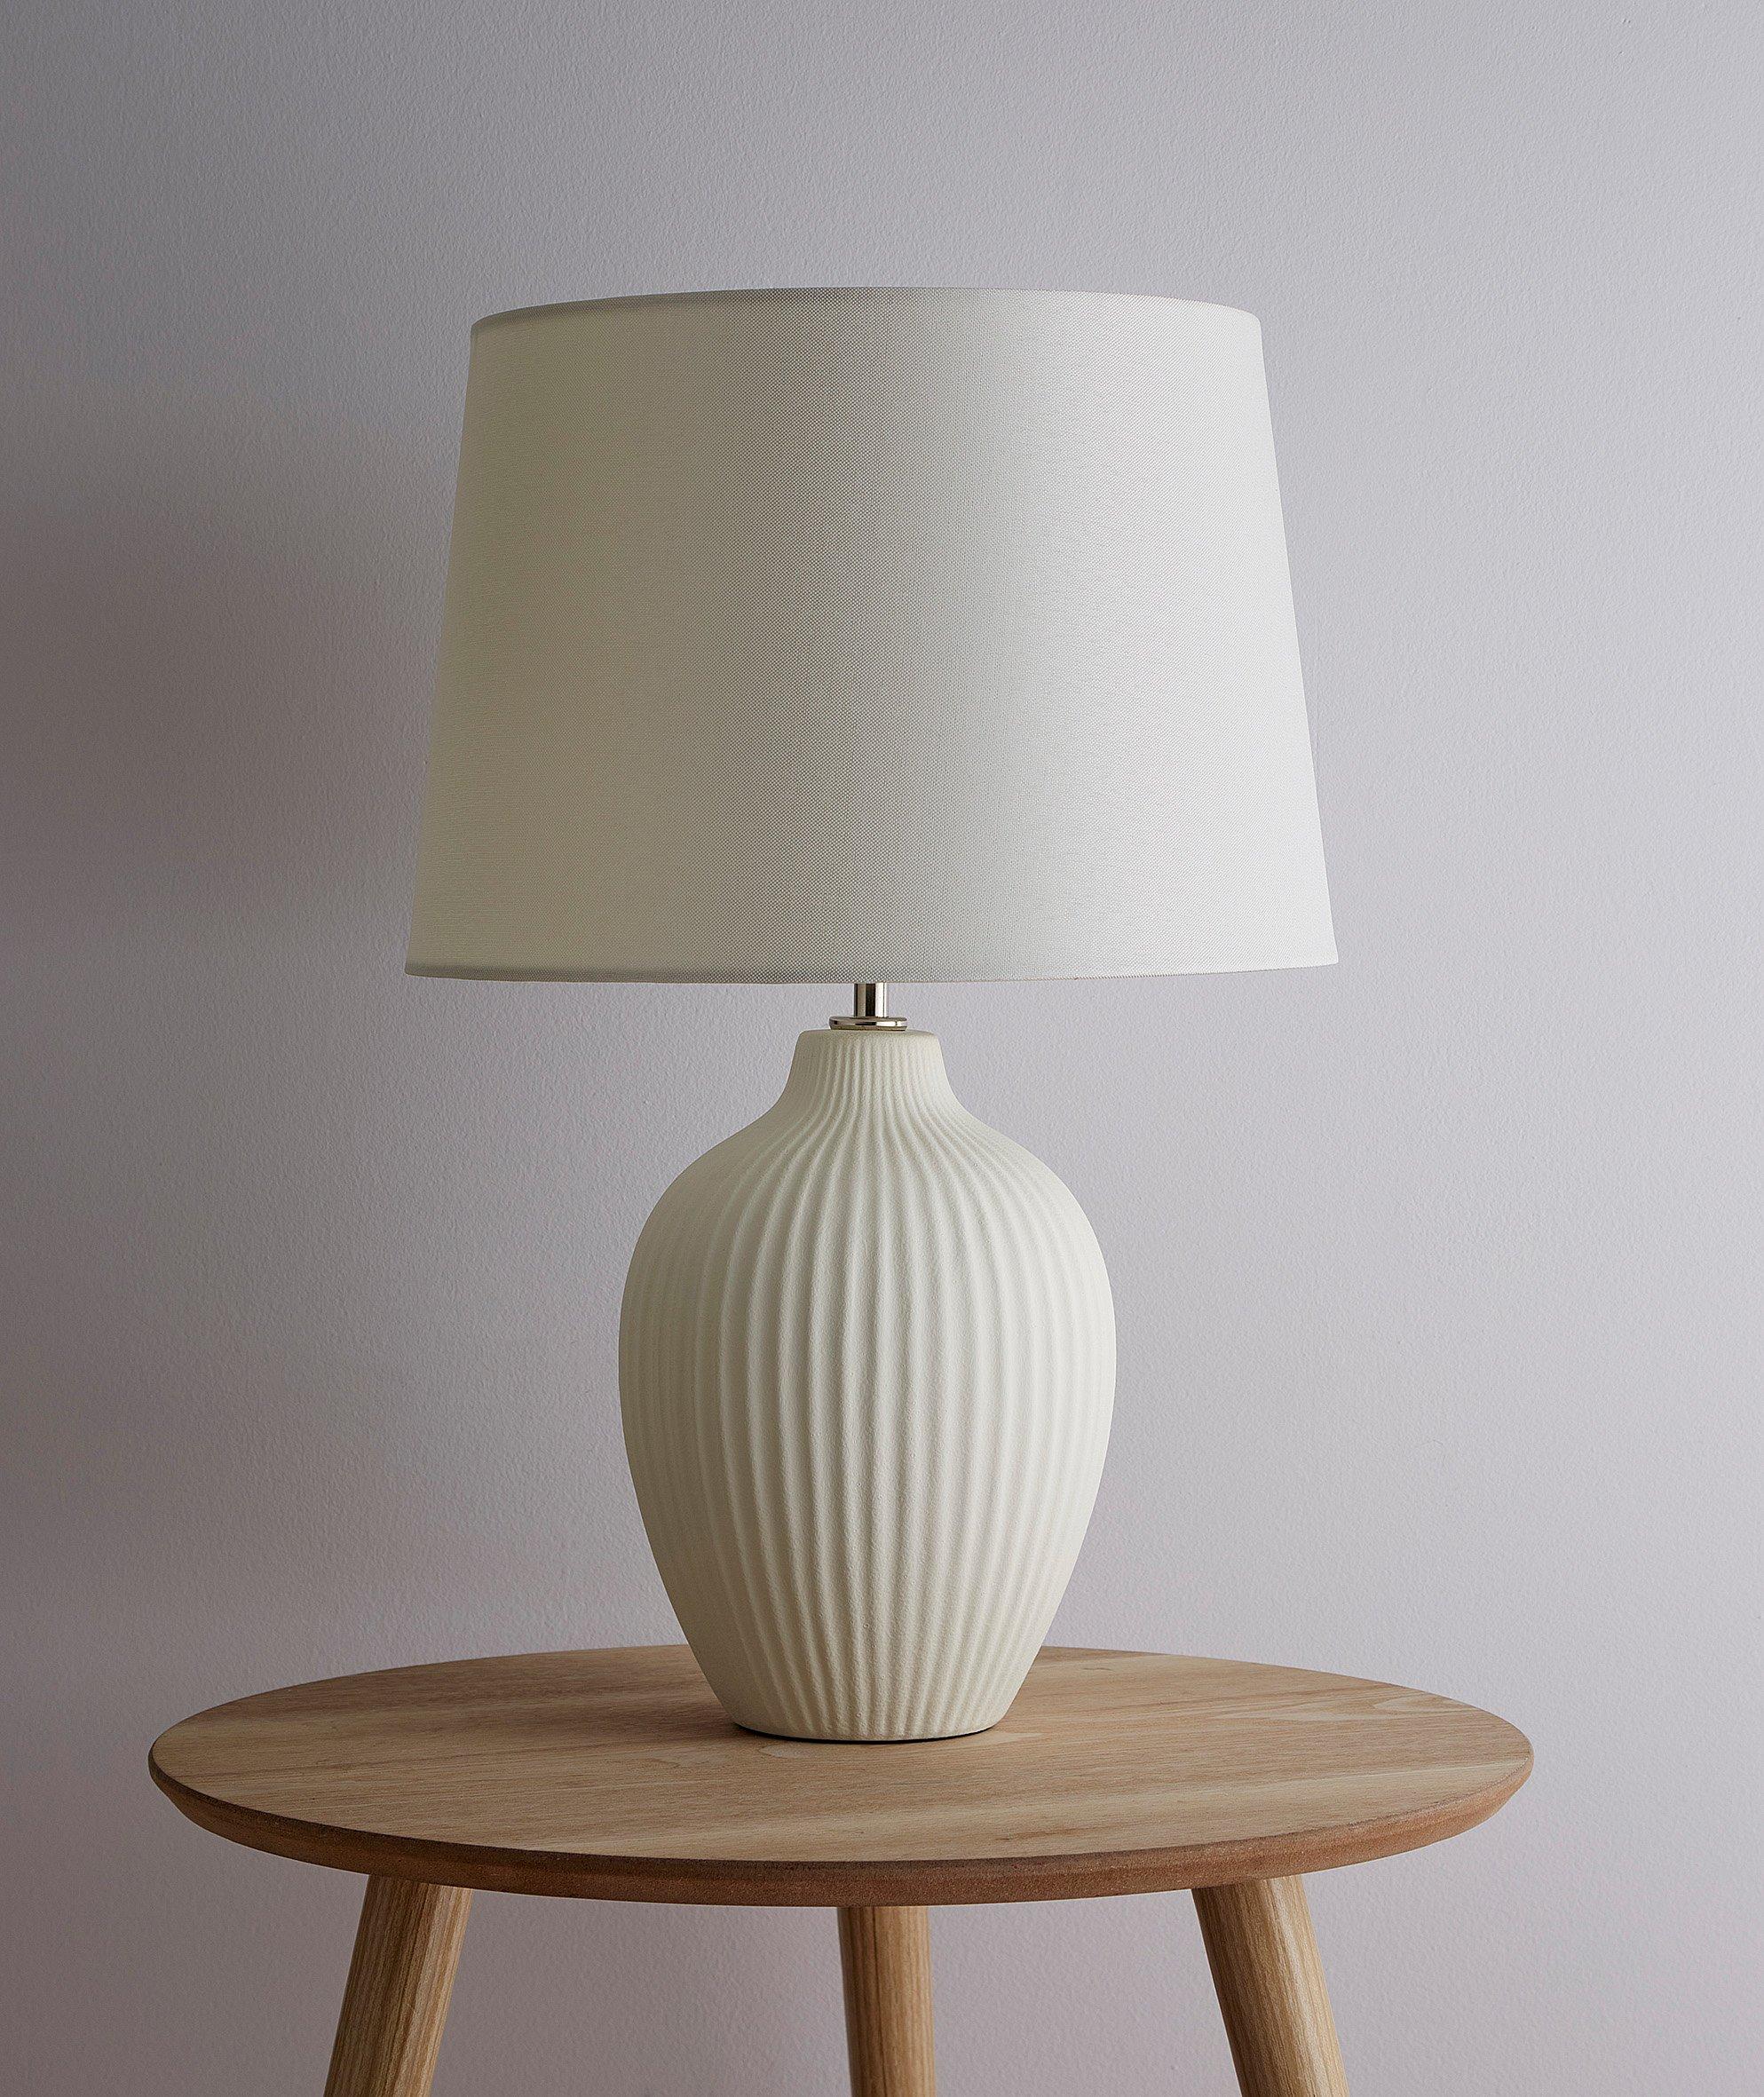 Ceramic Table Lamp with a Cream Textured Base and a Cream Tapered Lamp Shade to Match